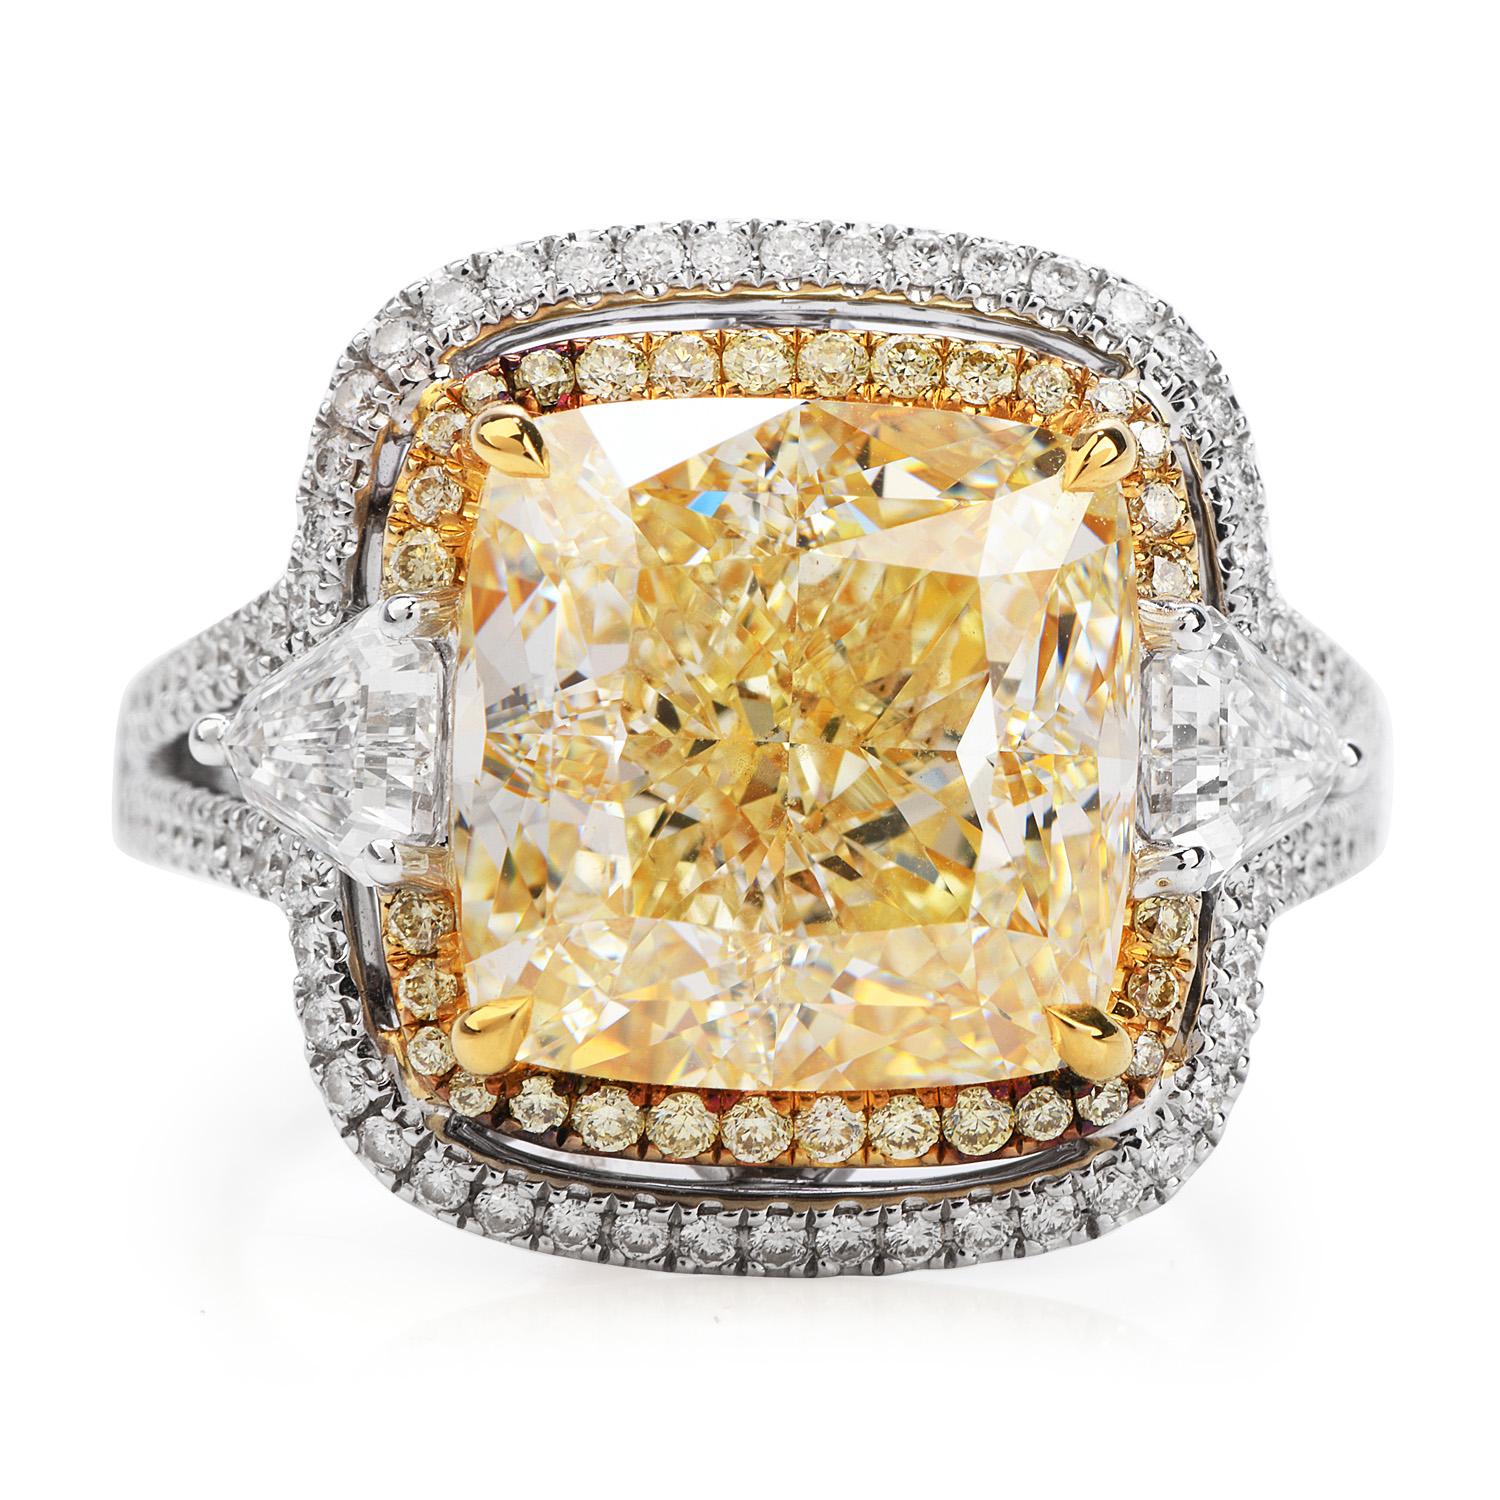 Join the Joyful Yellow Trend of the New Year!

What a better way to match the uniqueness of one person, but with an Extraordinaire piece?

 This stunning Yellow Diamond Engagement Cocktail Ring is crafted in solid 18K White and Yellow Gold, weighs